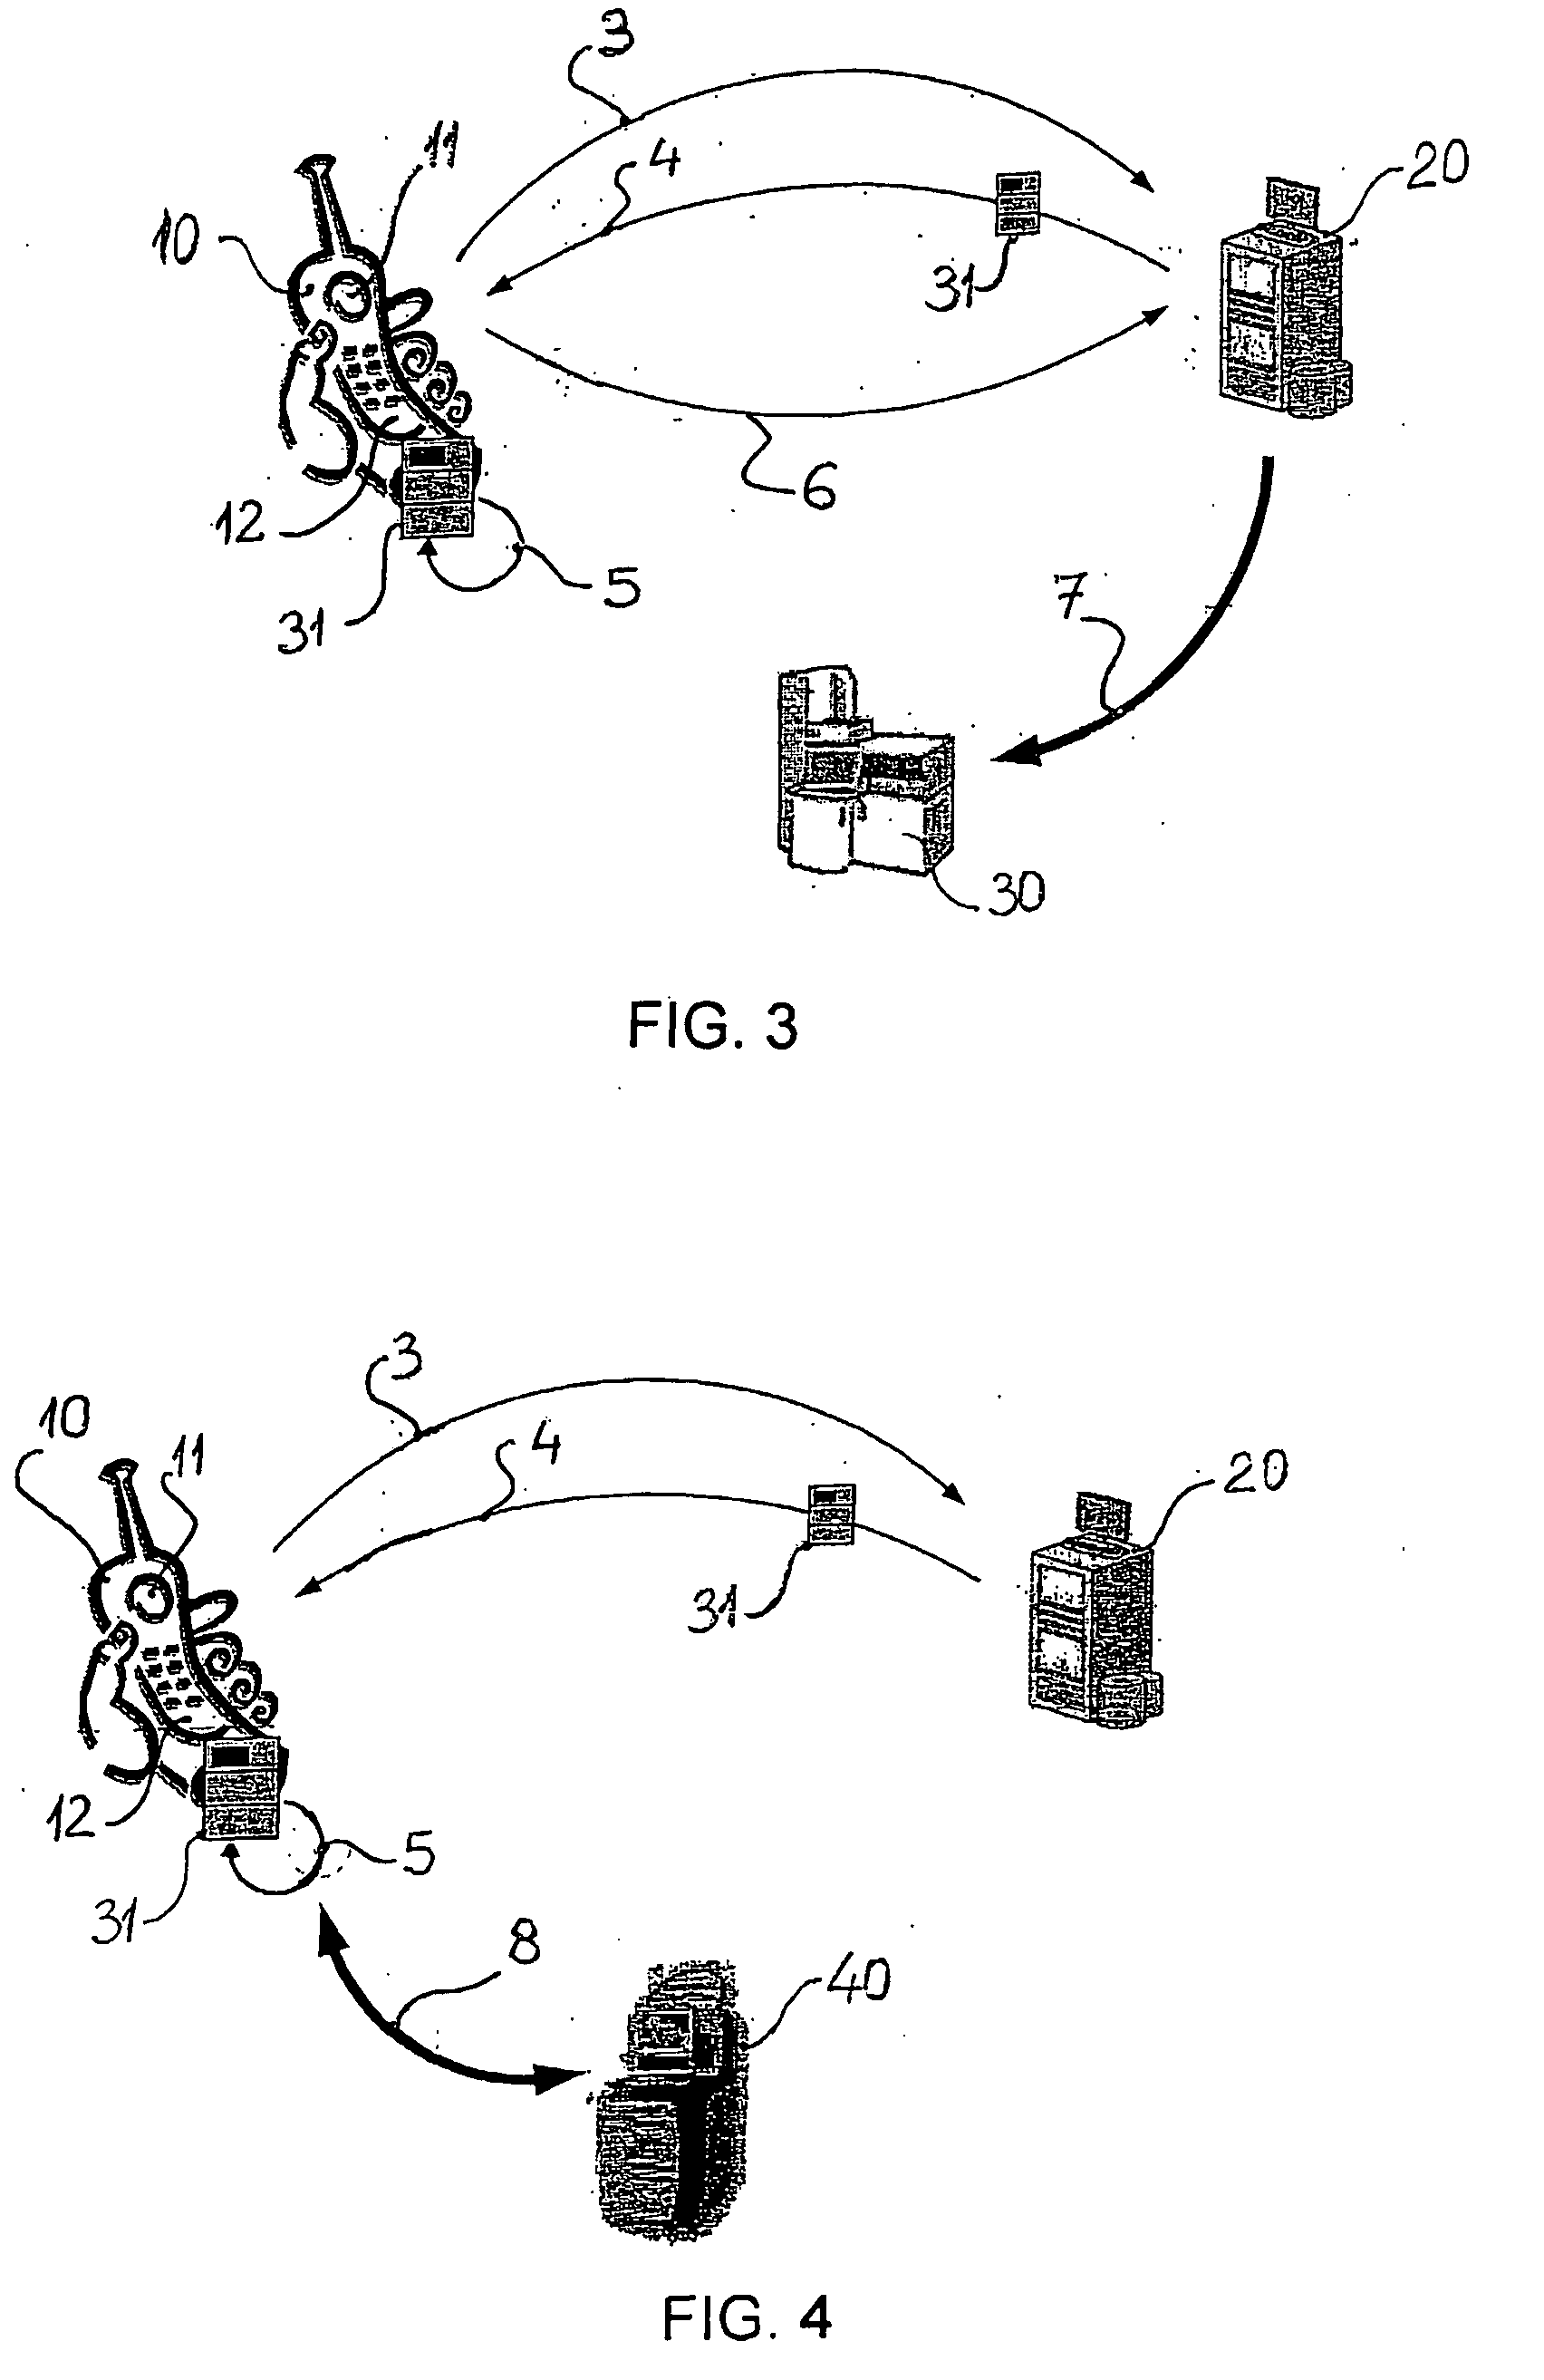 Process and system to supply a multimedia application on a terminal using a programming agent